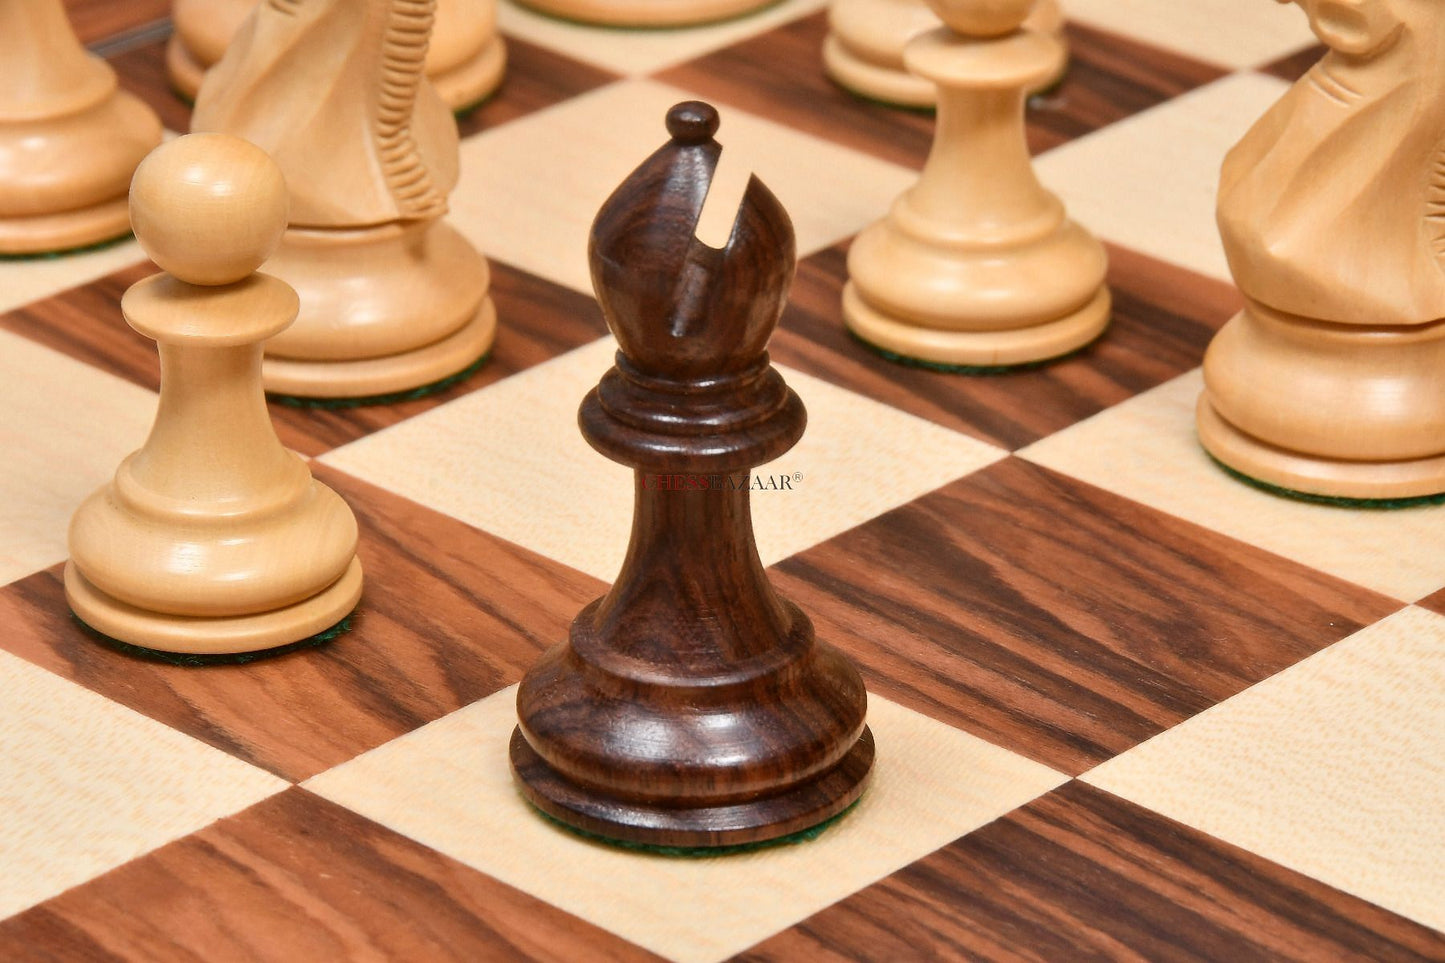 The Professional Series Tournament Staunton Weighted Chess Pieces in Indian Rosewood and Boxwood - 3.8" King